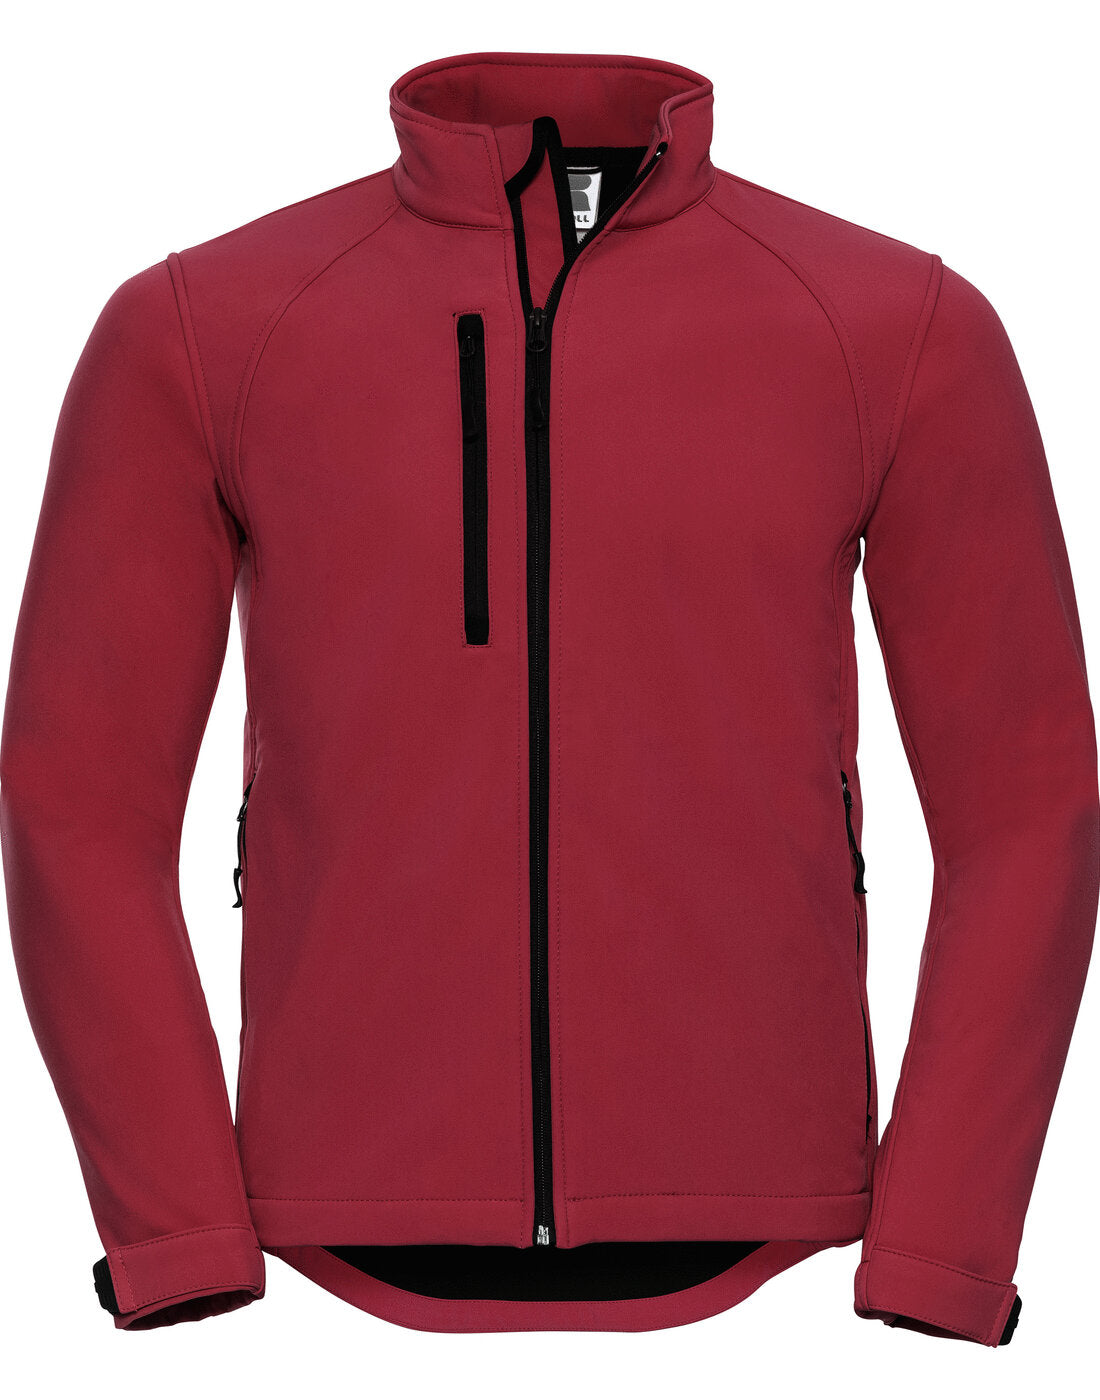 Russell Mens Softshell Jacket - Classic Red